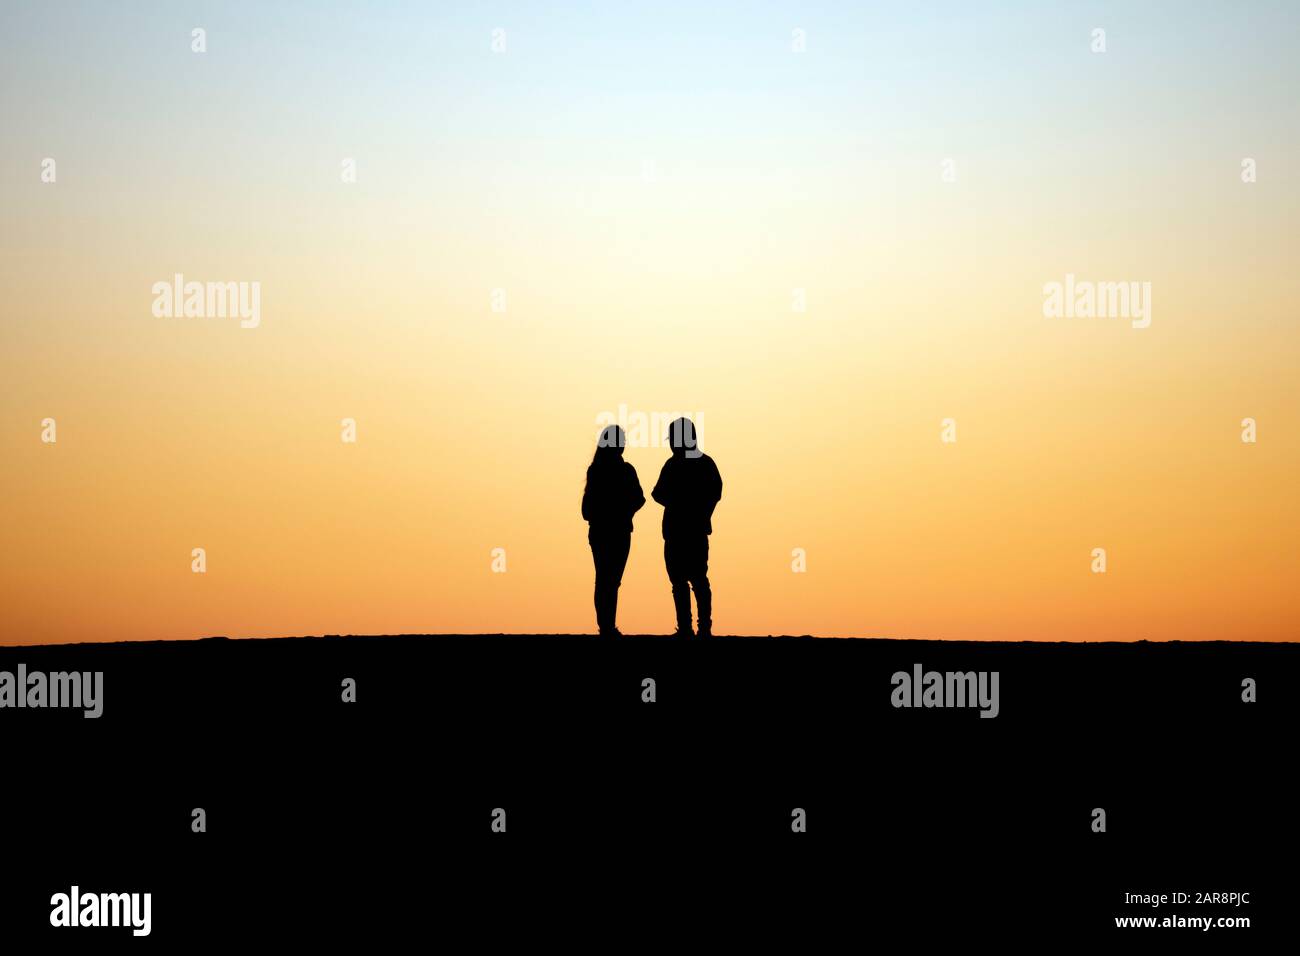 Two people silhouetted against twilight sky stand together side by side Stock Photo